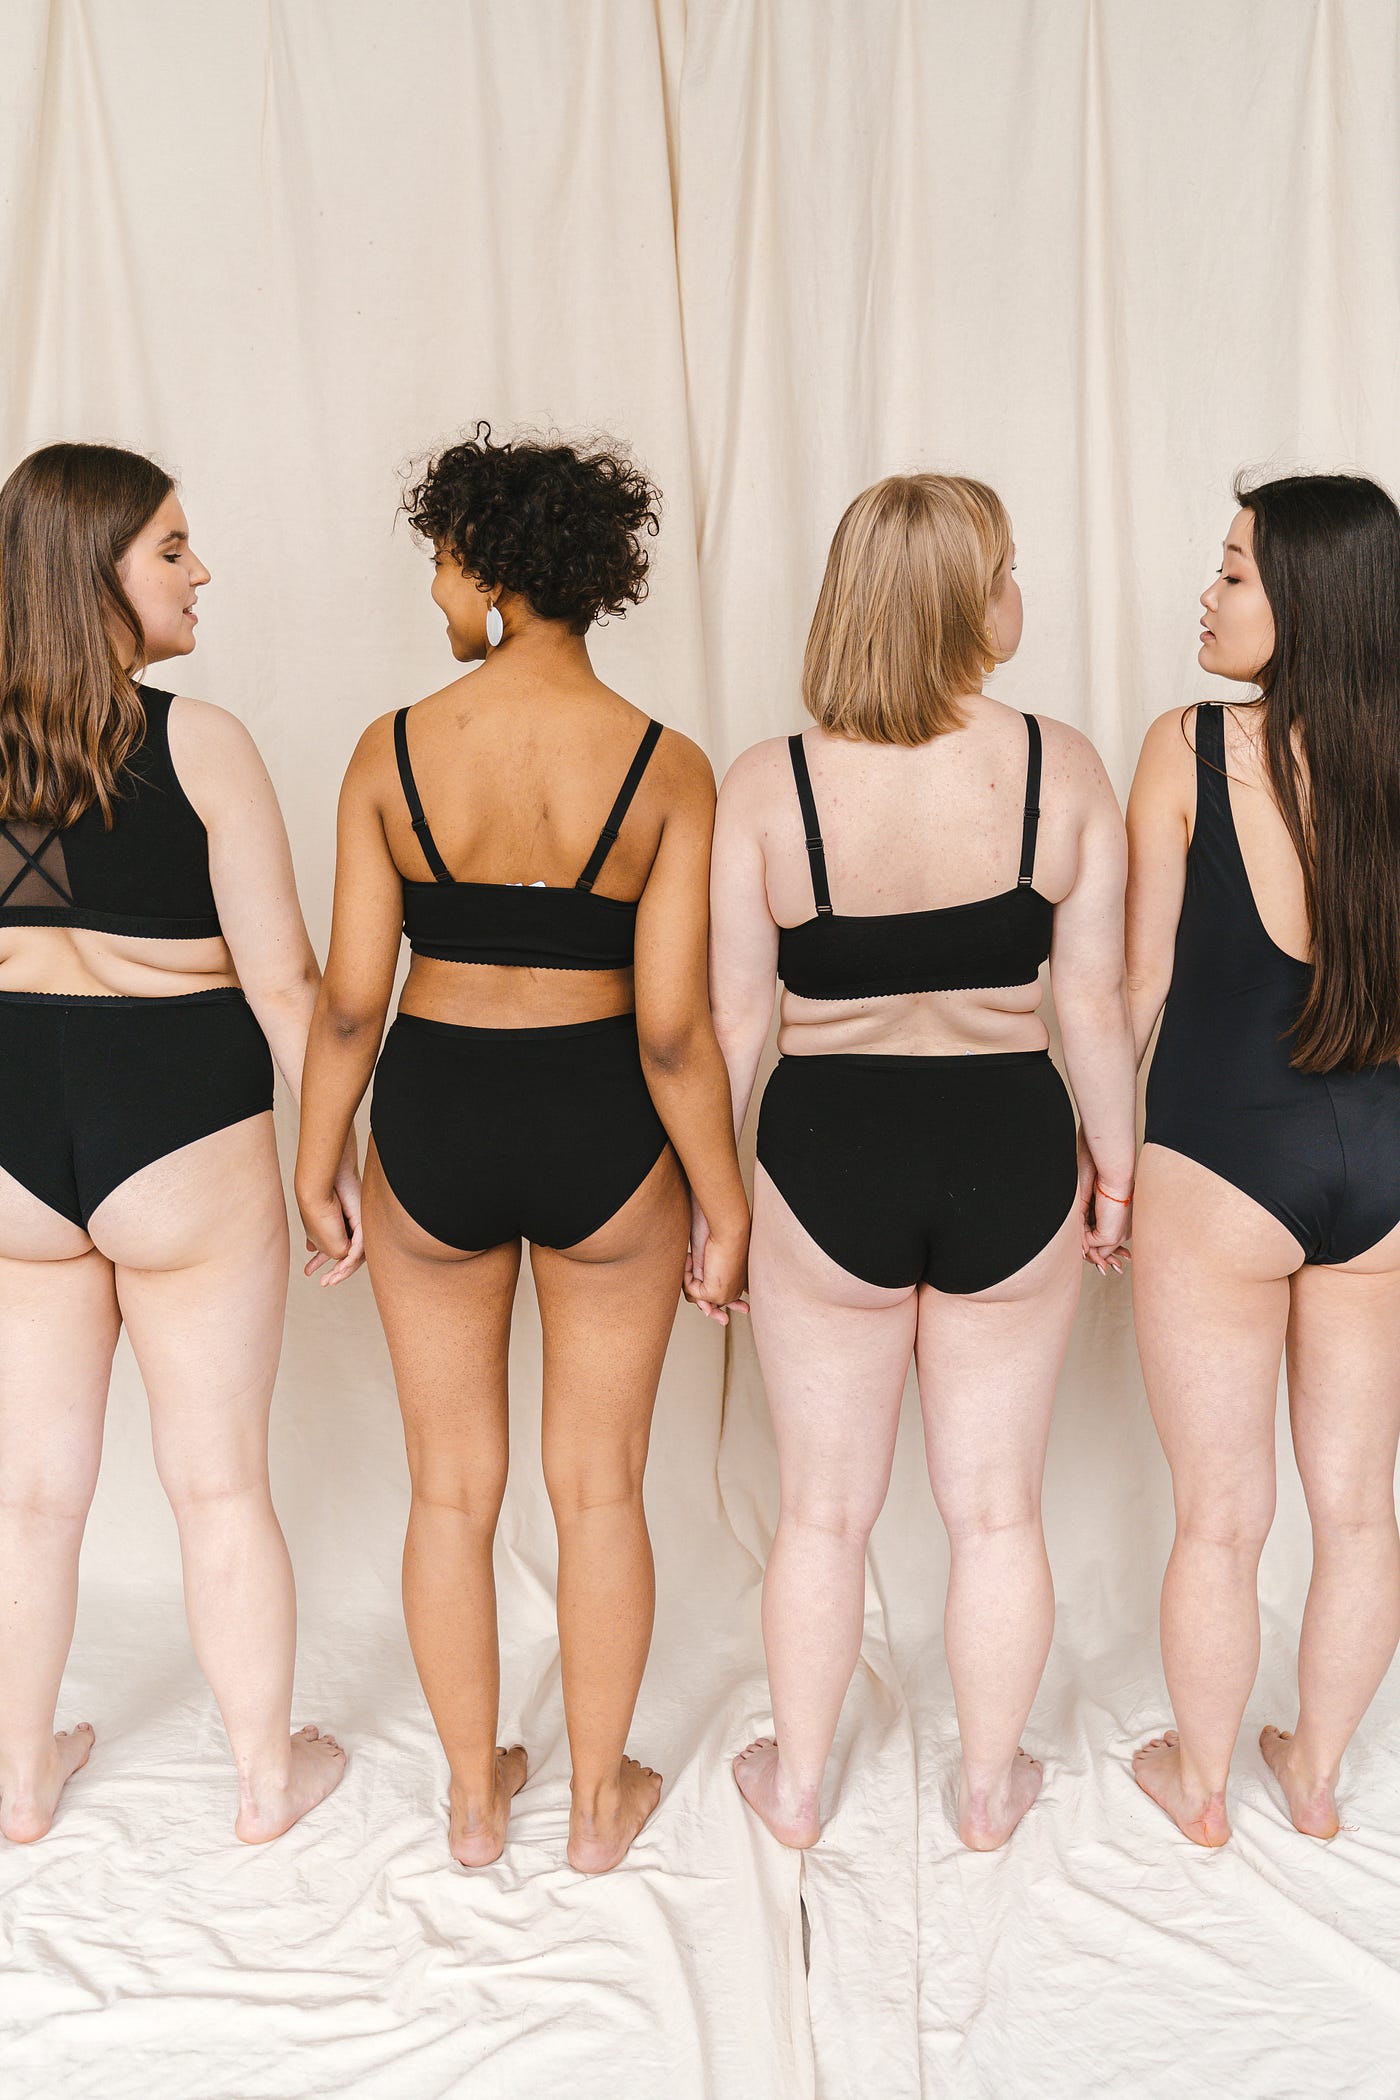 NOT EVERY WOMAN HAS HIPS, OK?. The perfect body is simply a matter of…, by  Leah-Ashley McCauley, ILLUMINATION